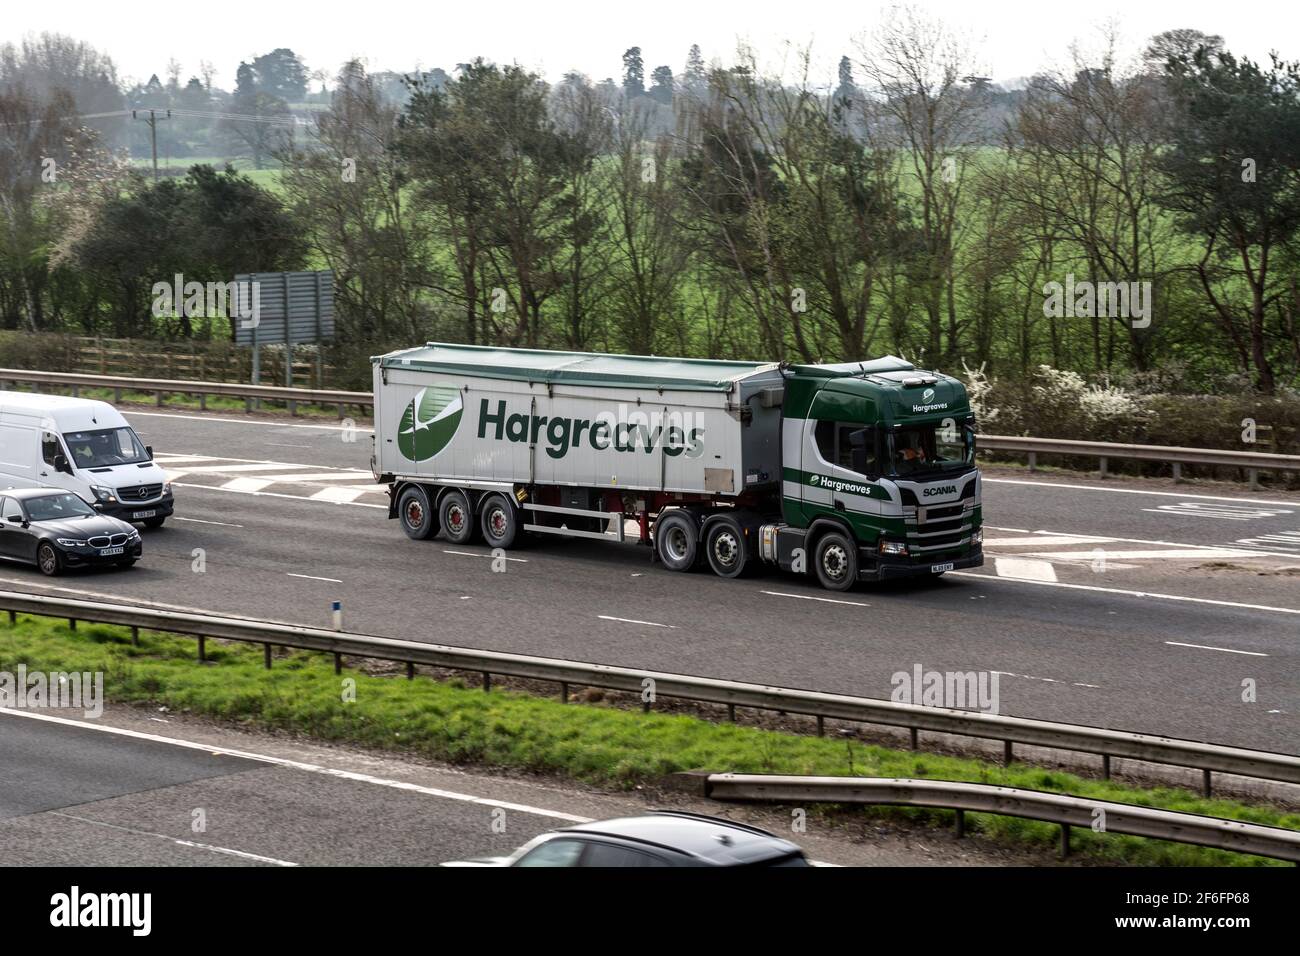 A Hargreaves articulated lorry on the M40 motorway, Warwick, UK Stock Photo